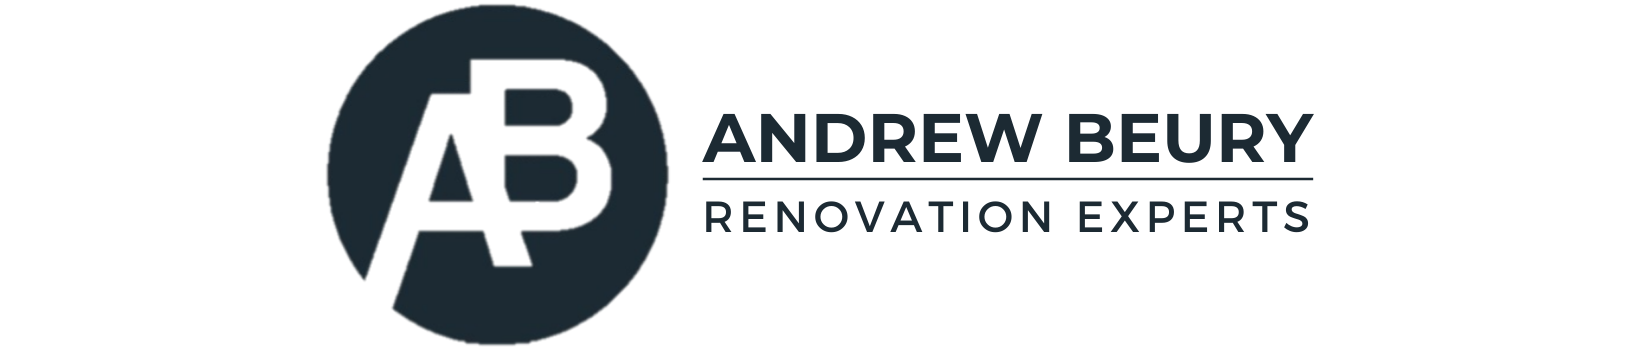 Andrew Beury Renovation Experts